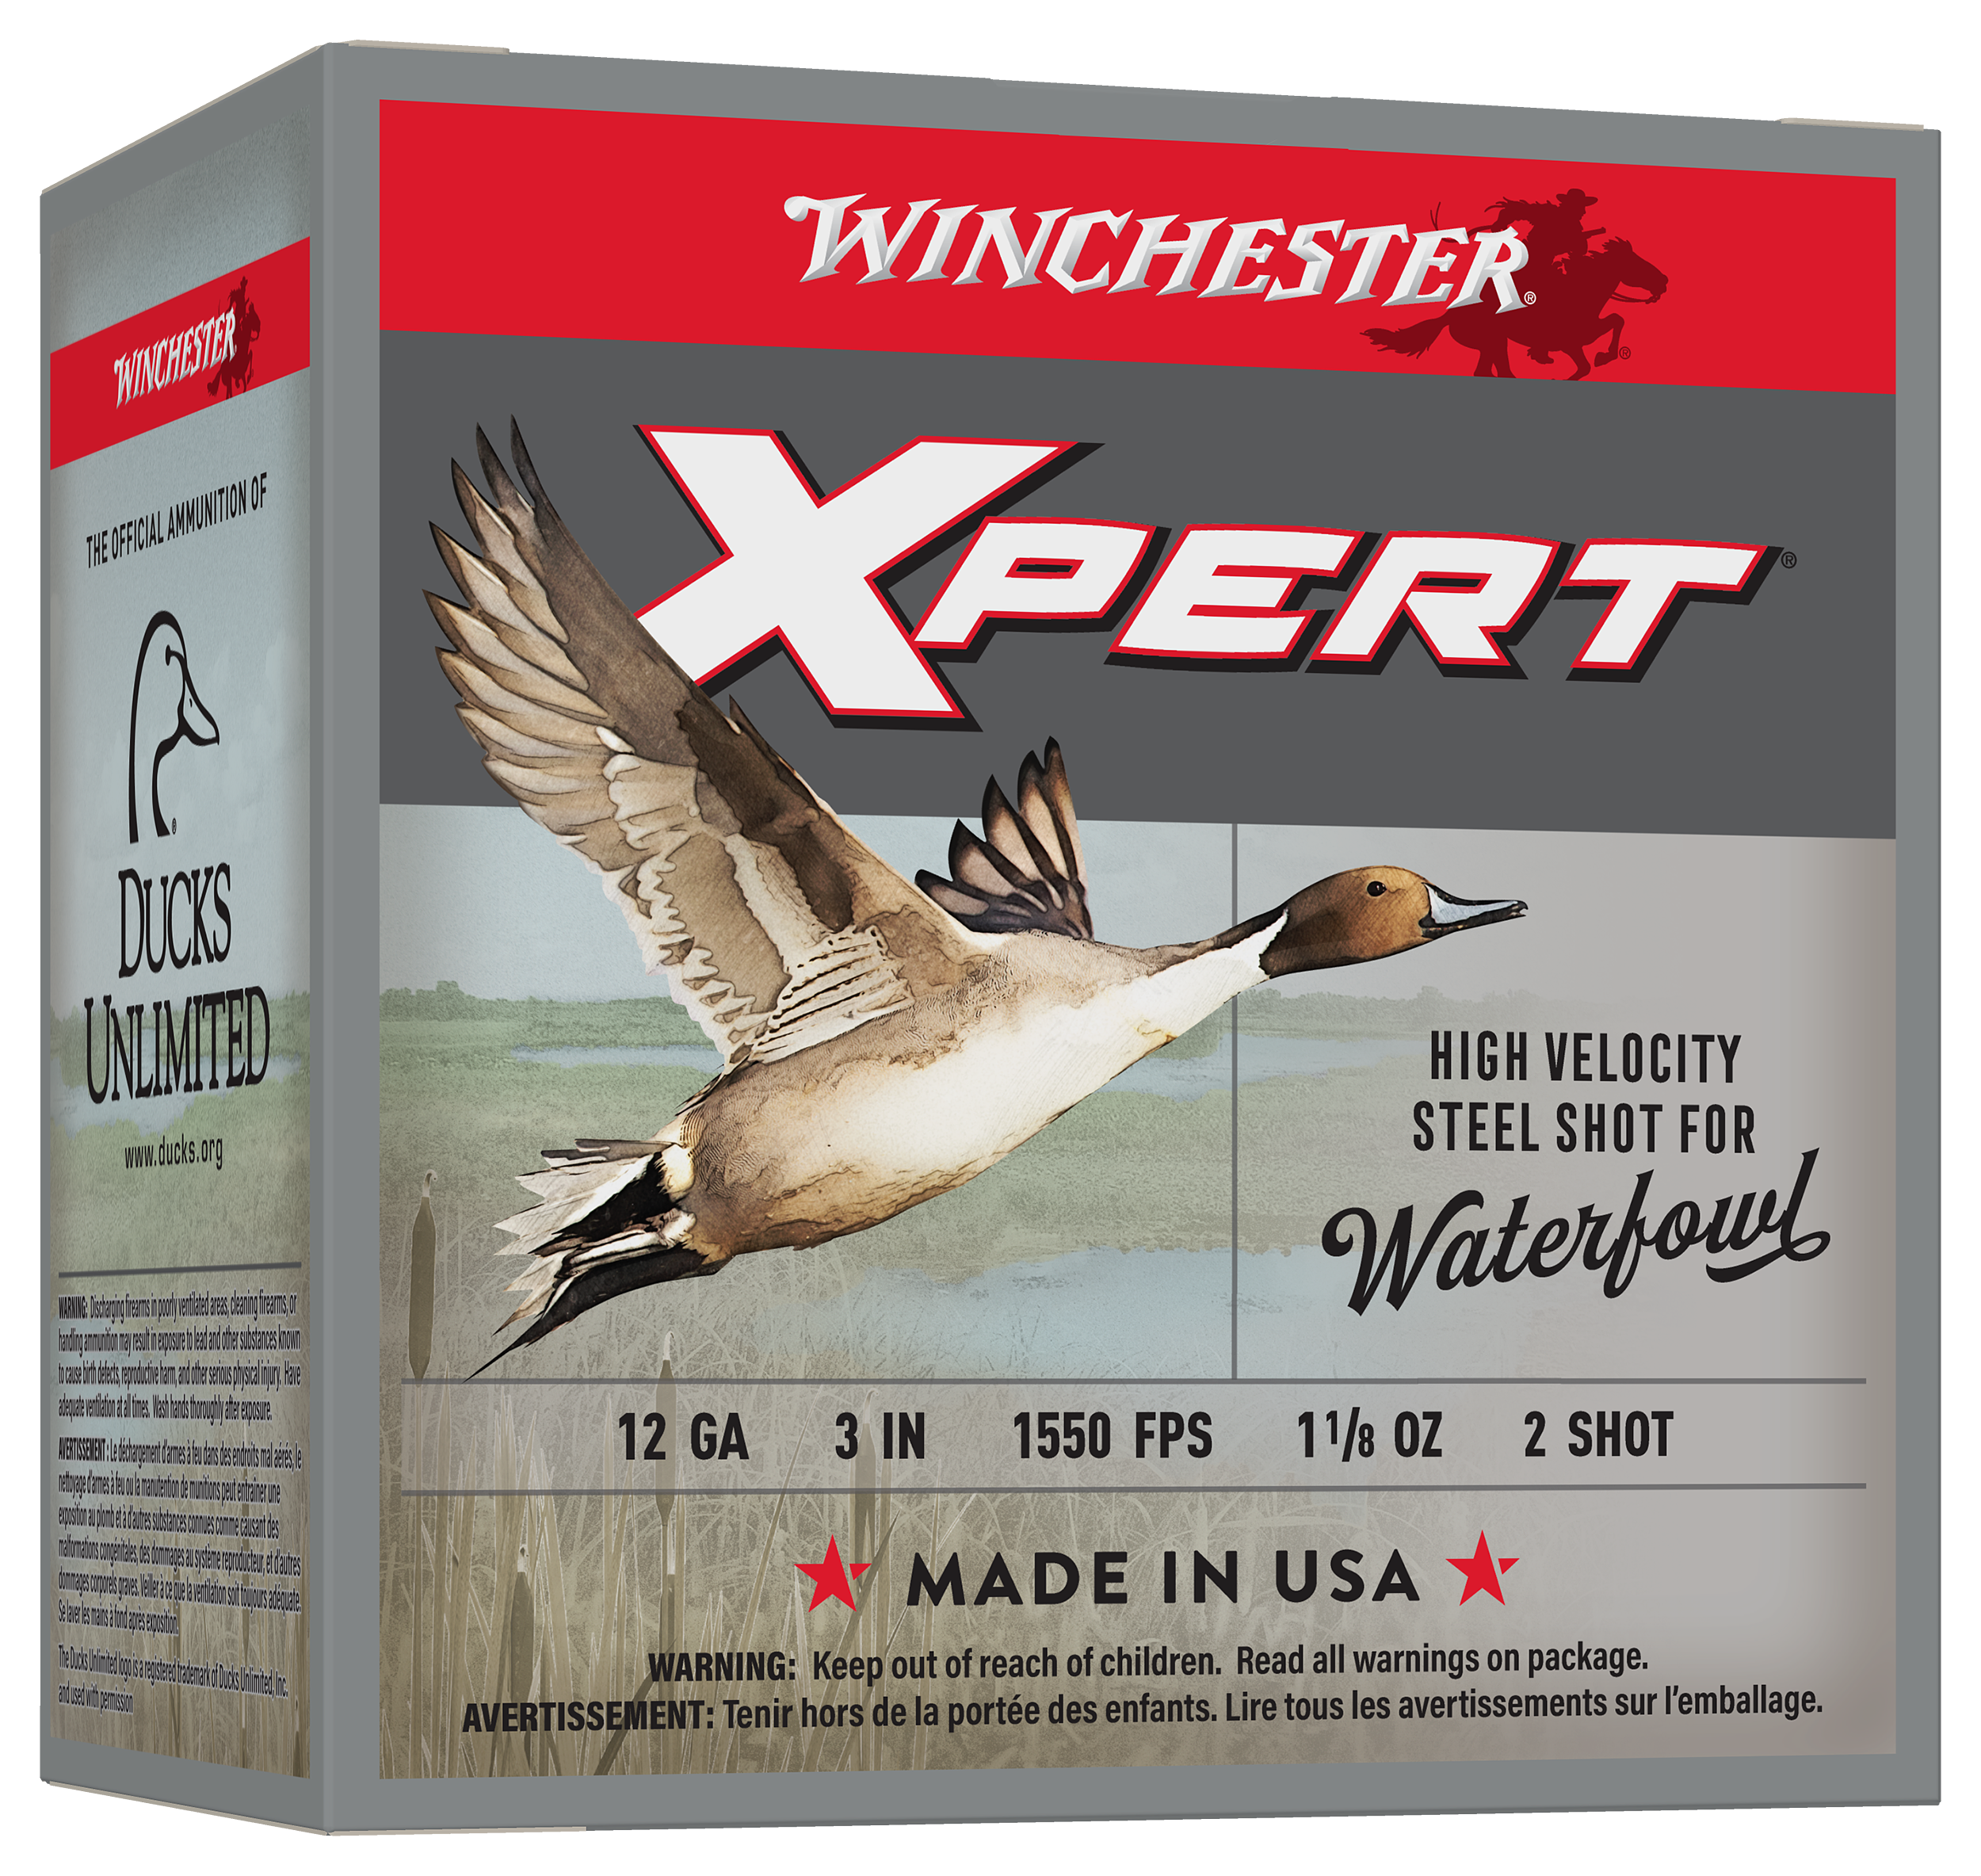 Winchester Xpert Steel Upland Game and Target Load 20 Gauge Shotshells - 25  Rounds